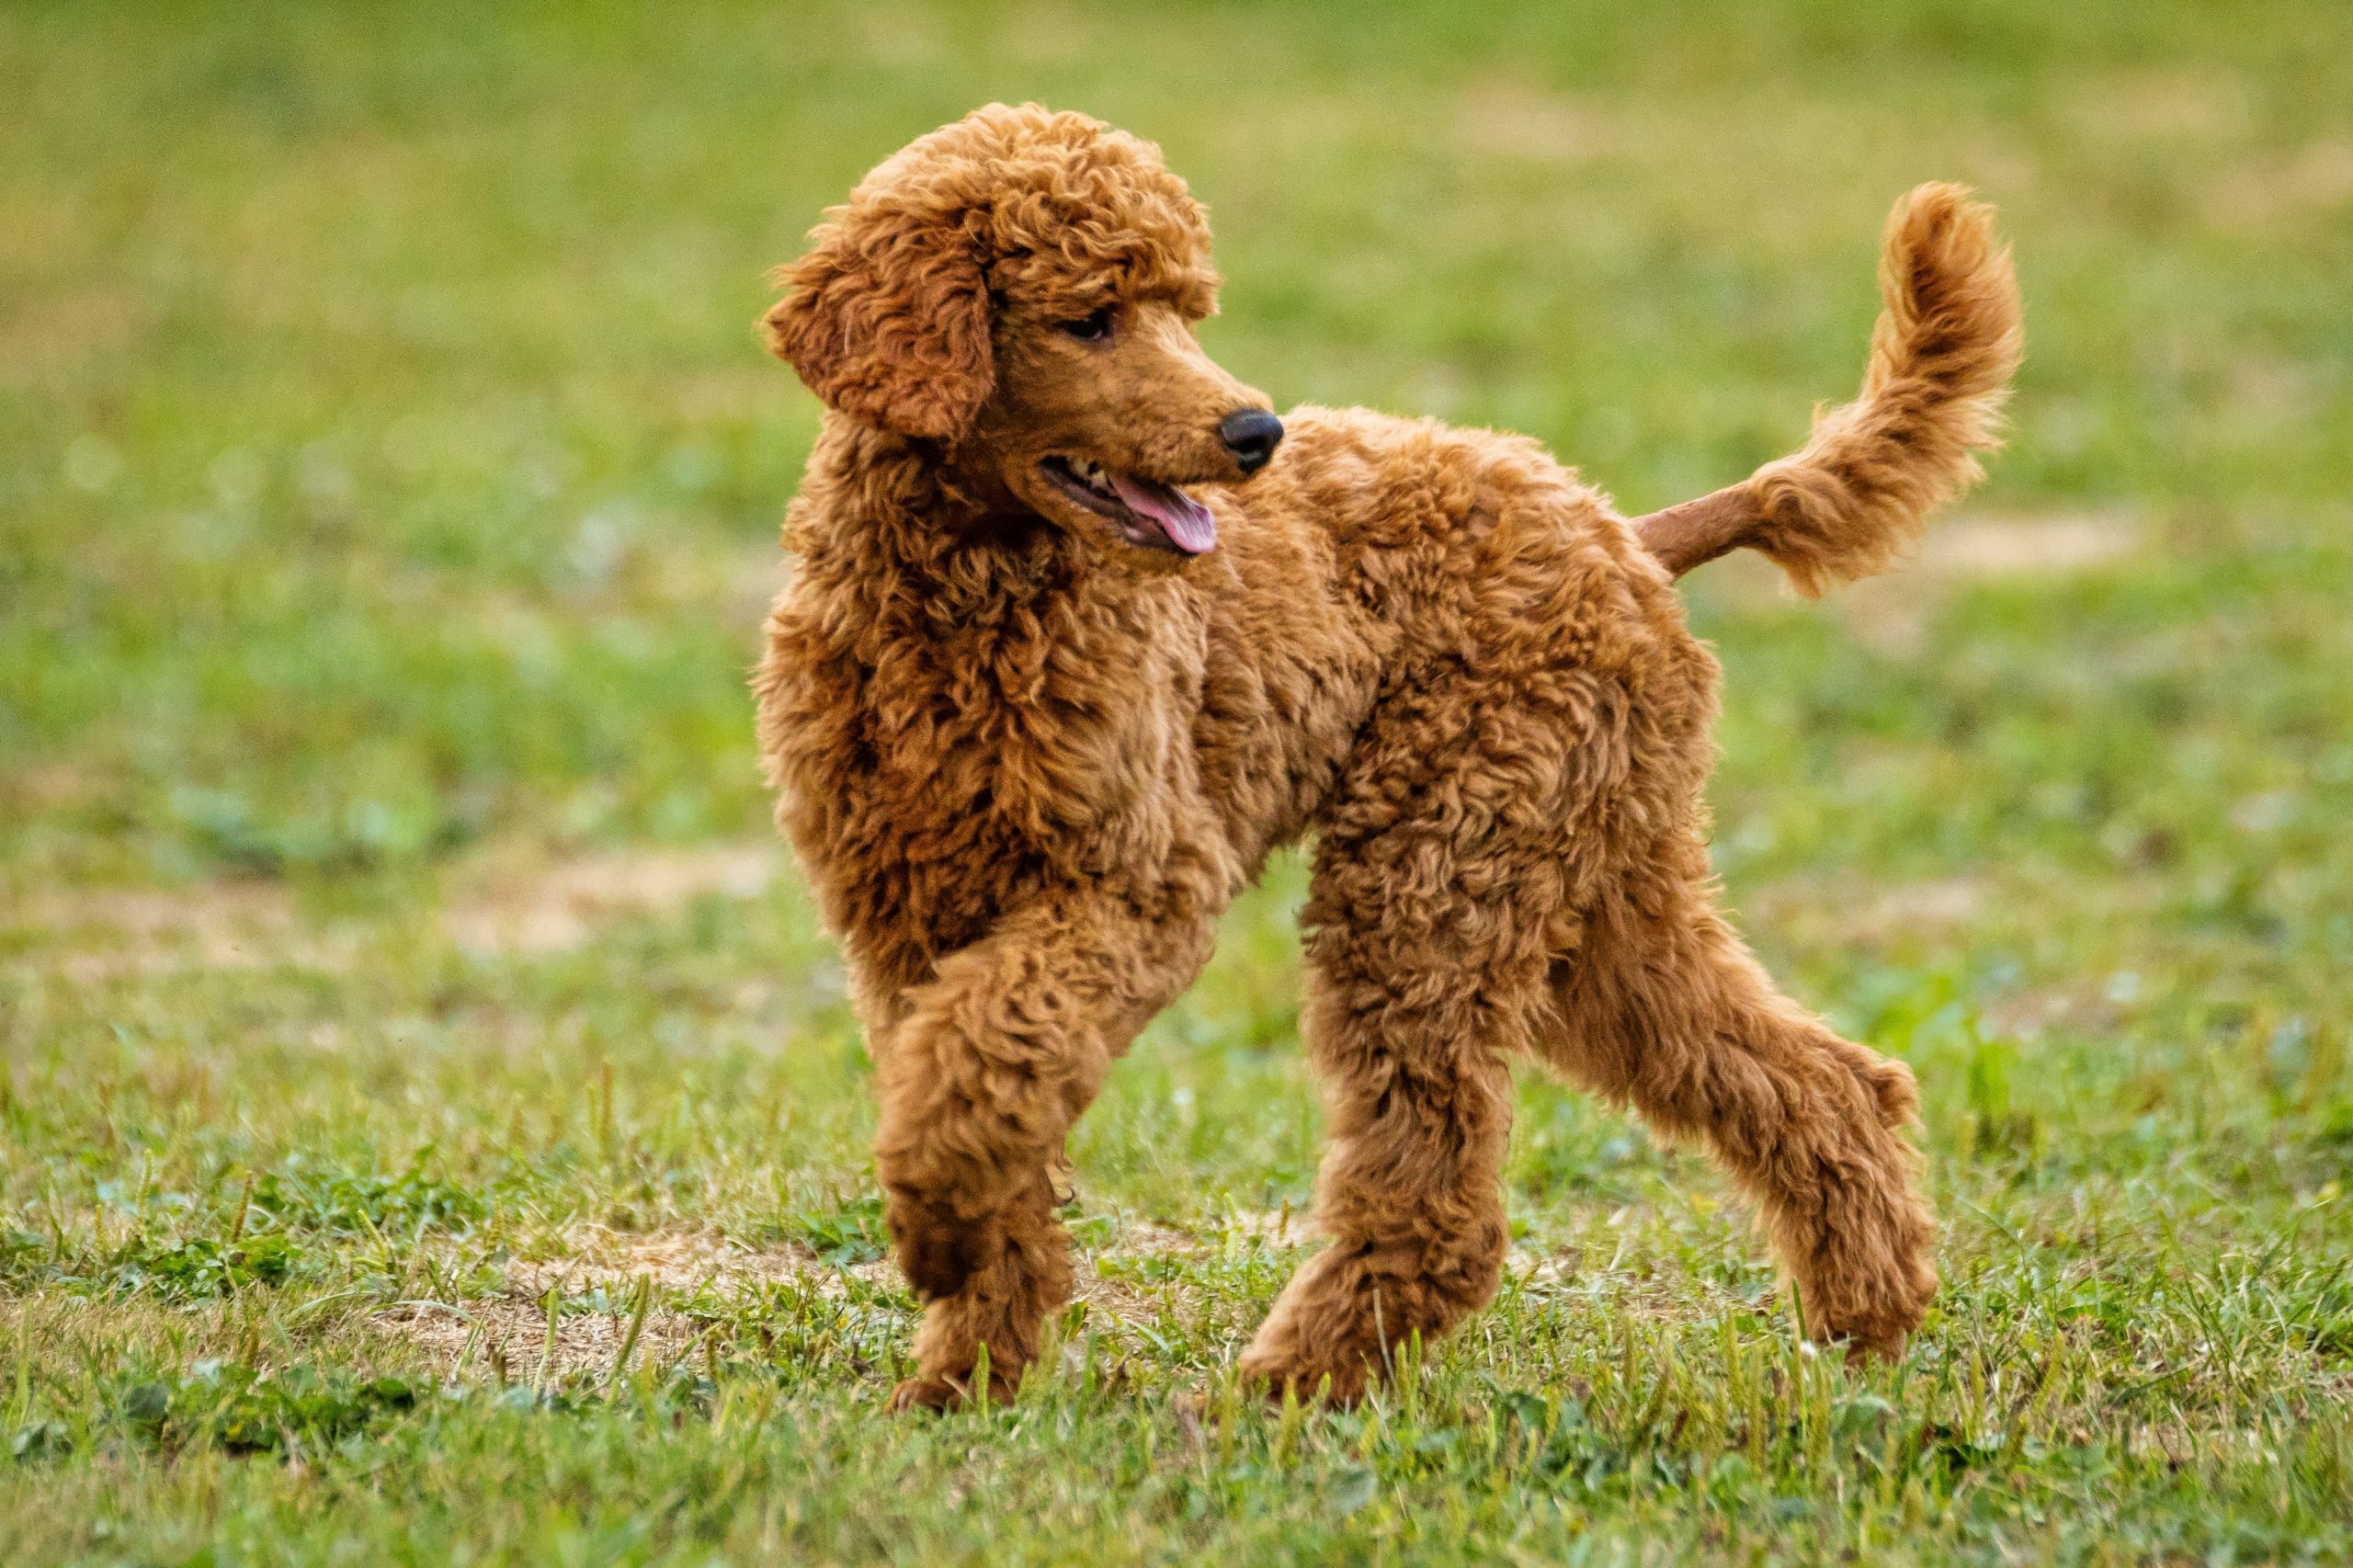 A beautiful brown poodle walking in nature while someone wonders how much is a brown poodle